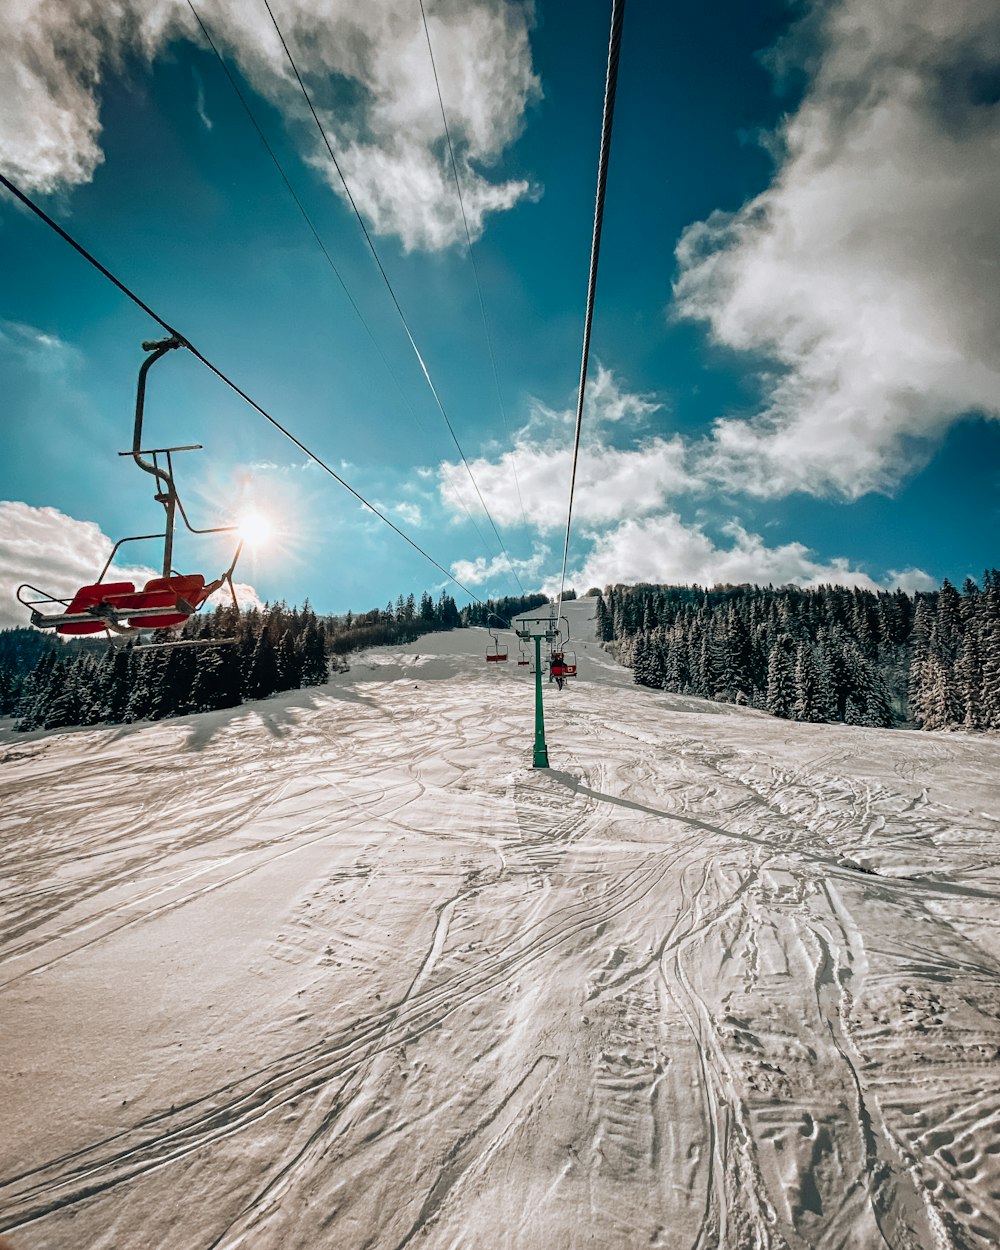 a ski lift going up a snowy hill